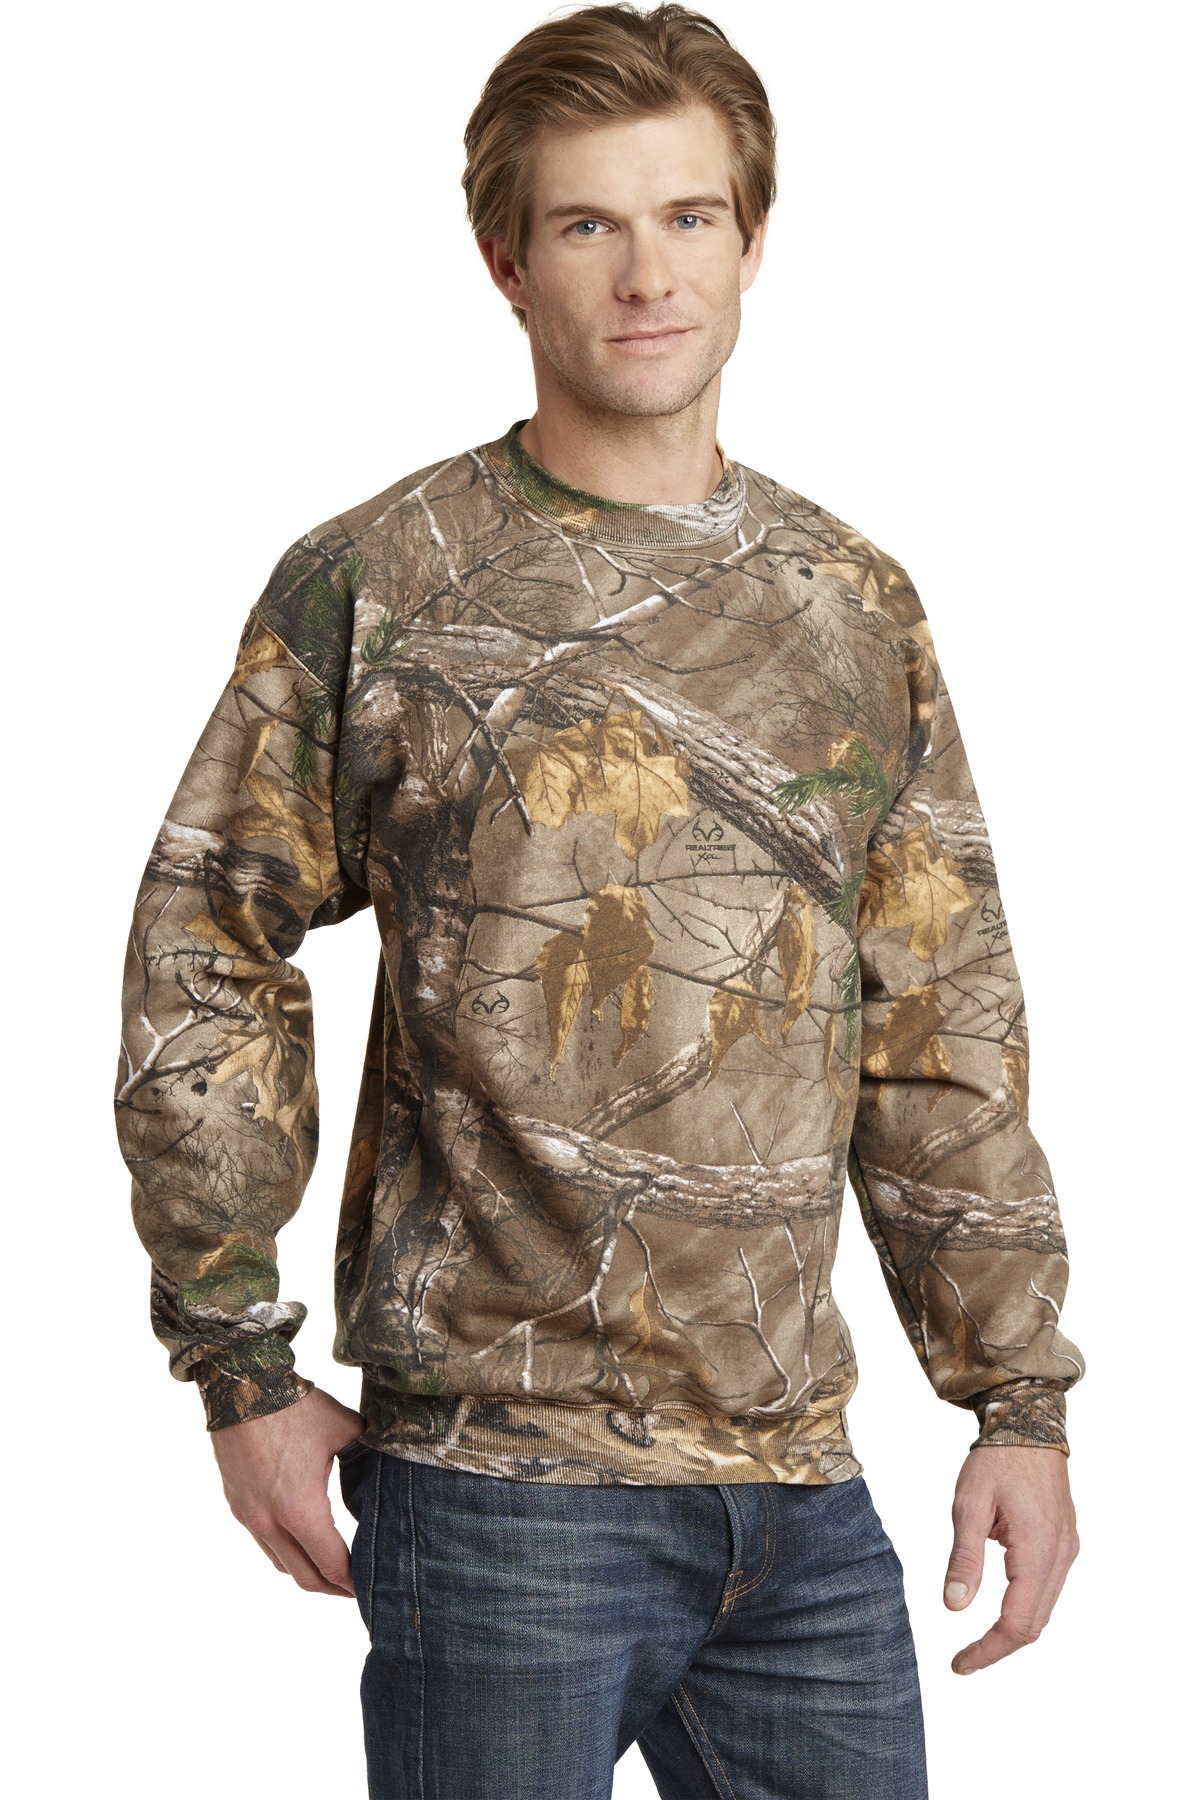 DISCONTINUED Russell Outdoors Realtree Crewneck Sweatshirt. S188R ...